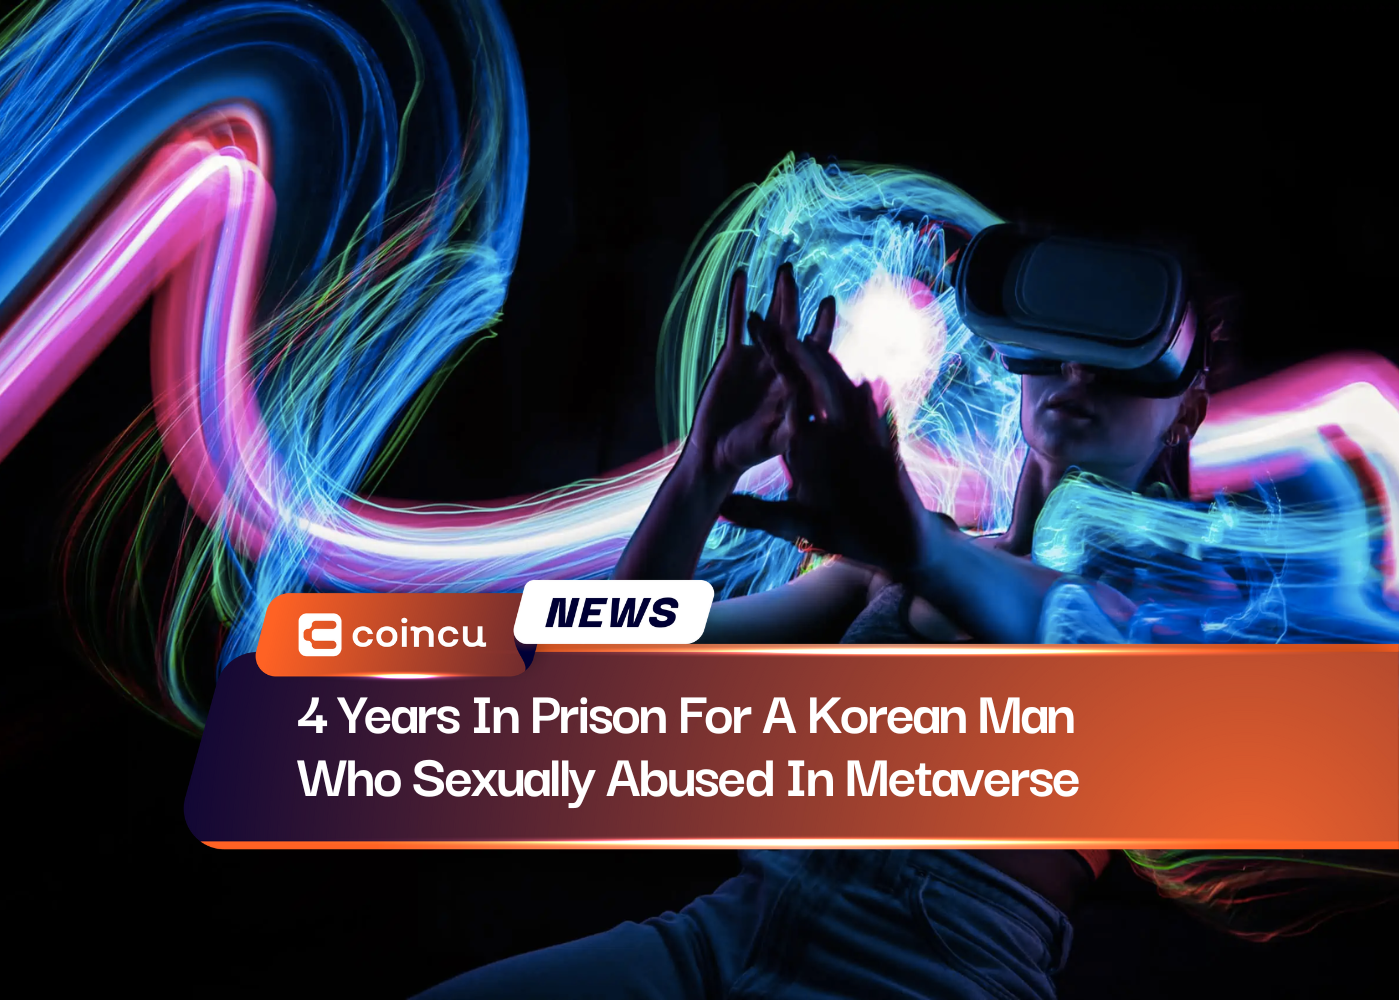 4 Years In Prison For A Korean Man Who Sexually Abused In Metaverse